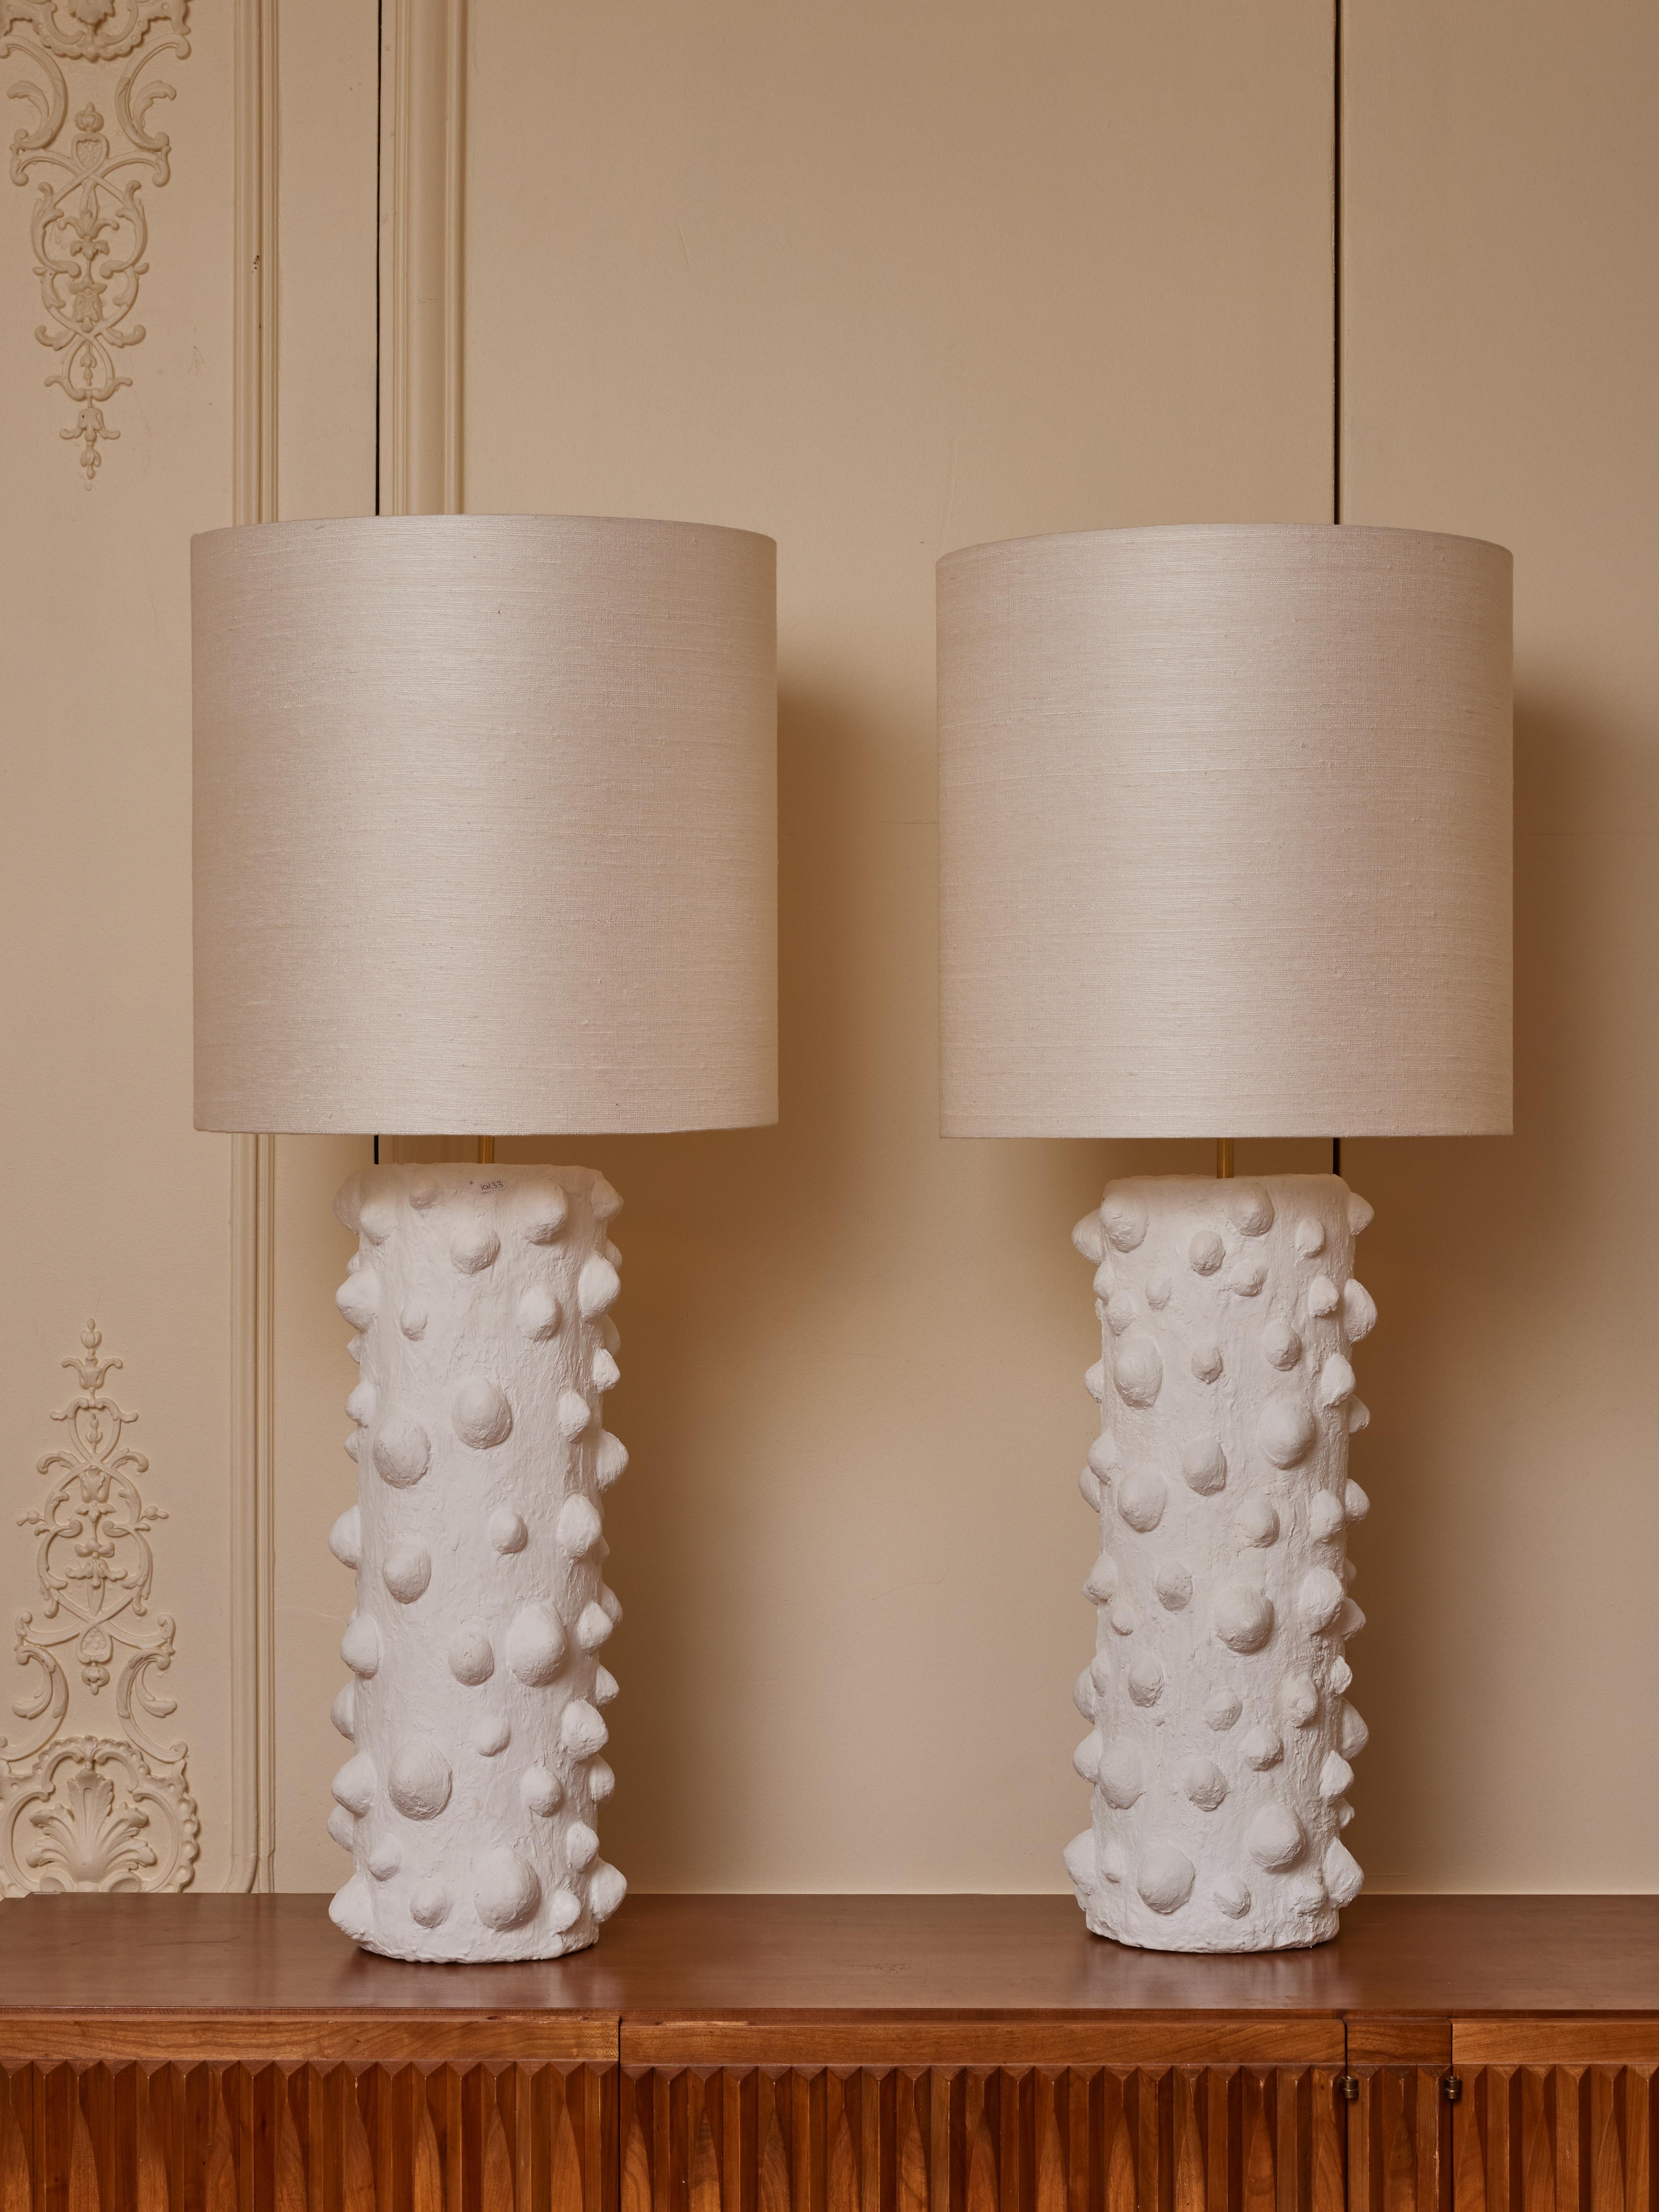 Pair of table lamps in sculpted plaster.
Signed piece by the artist LYNX.
France, 2024.